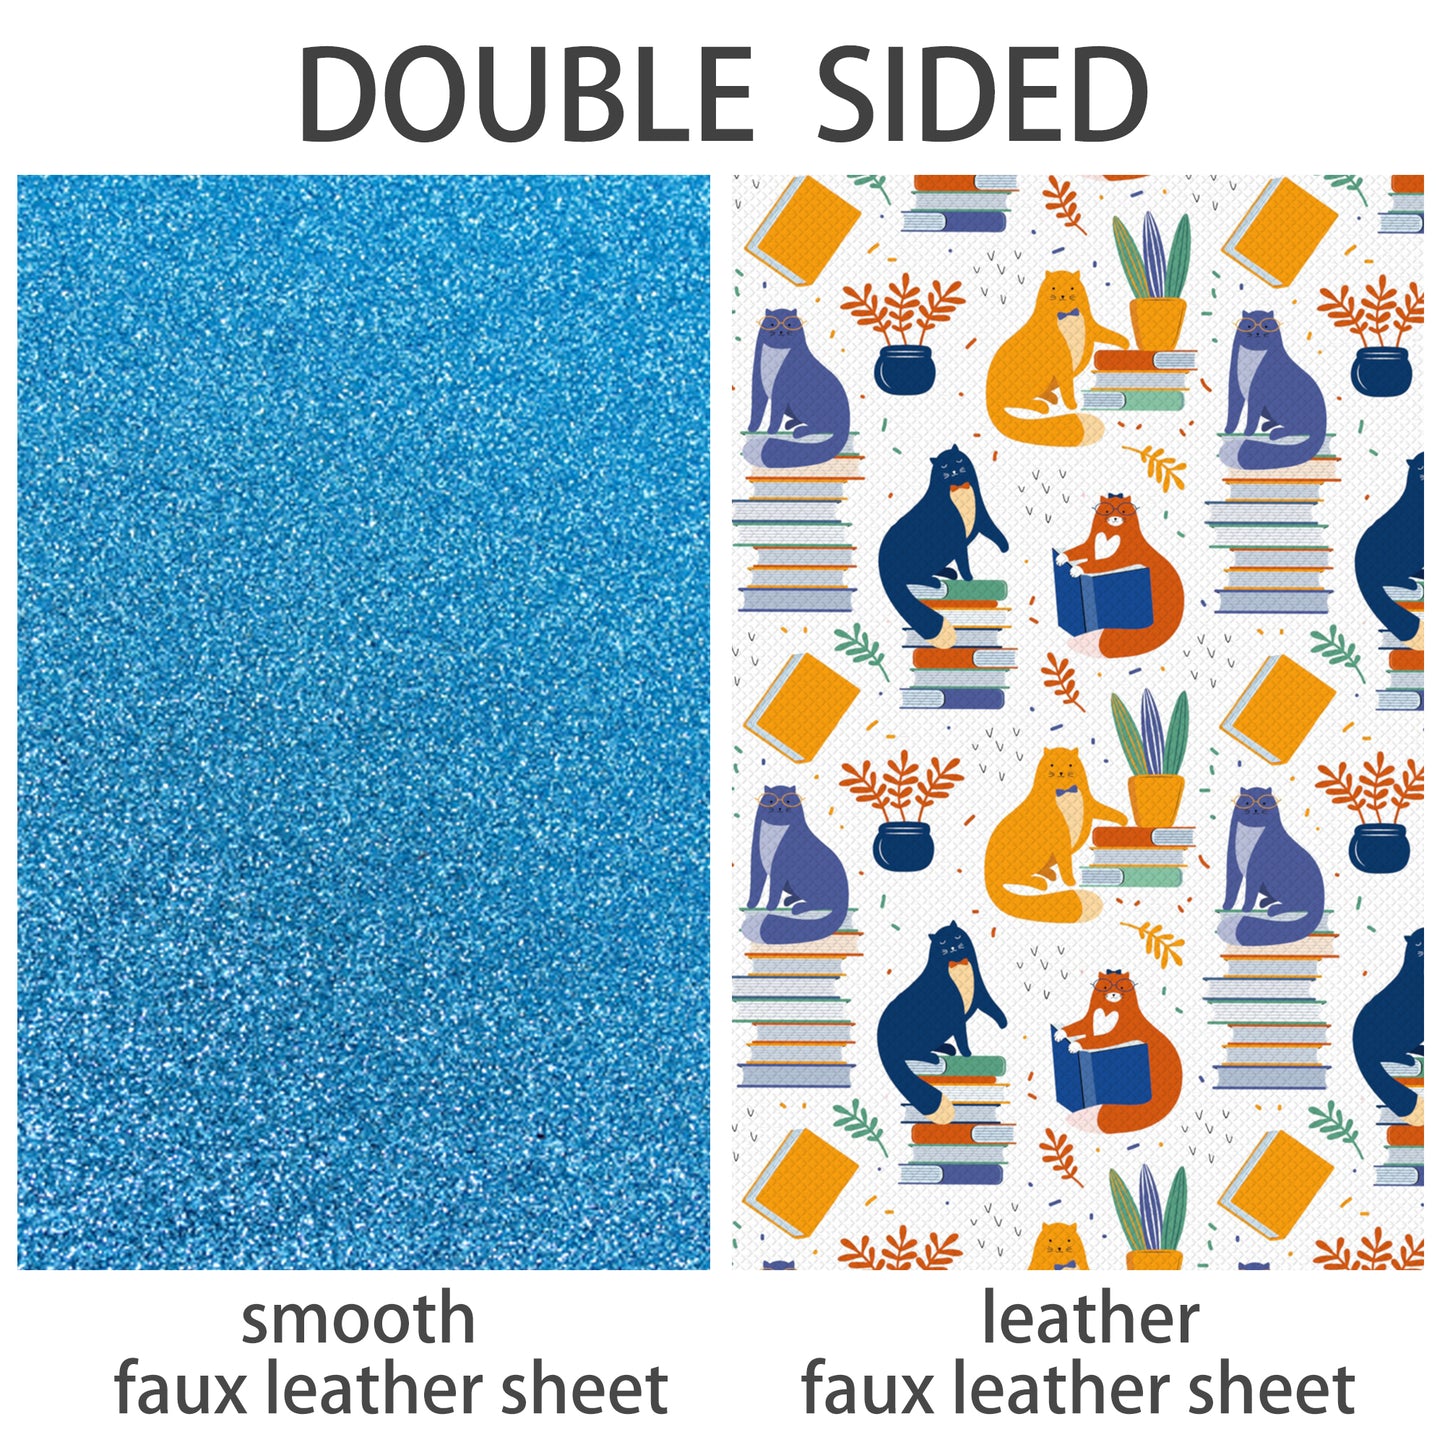 Back to School Double Sided Faux Leather Sheets Wholesale